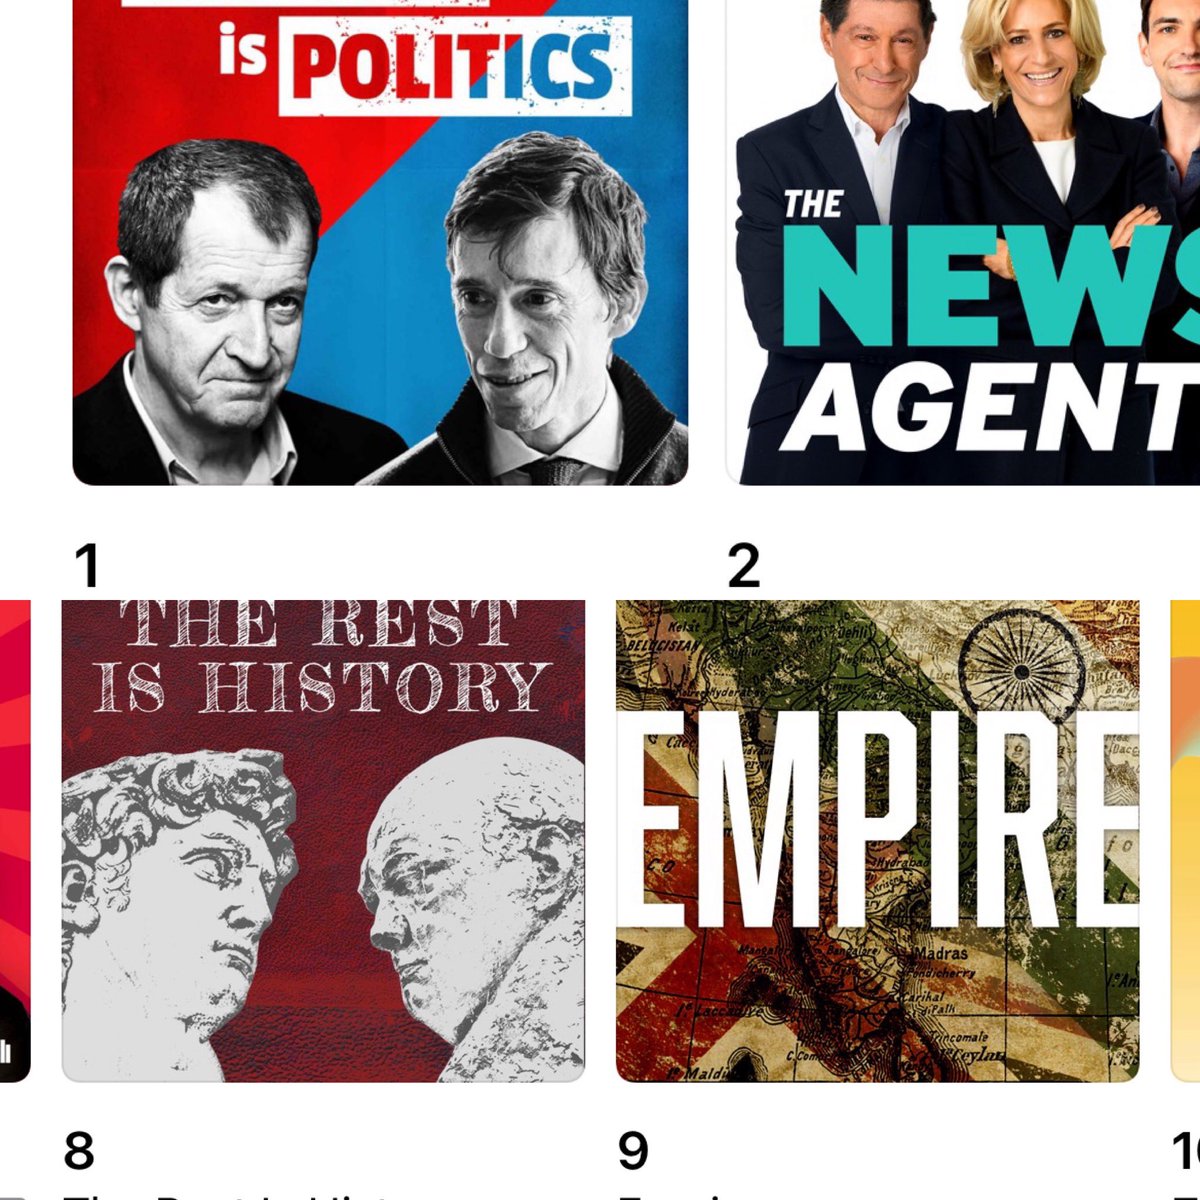 Huge congratulations to our lovely producers @GoalhangerPods - three shows in the podcast top 10 - @RestIsPolitics @TheRestHistory and lil old us @EmpirePodUK ! The very best people to work with!